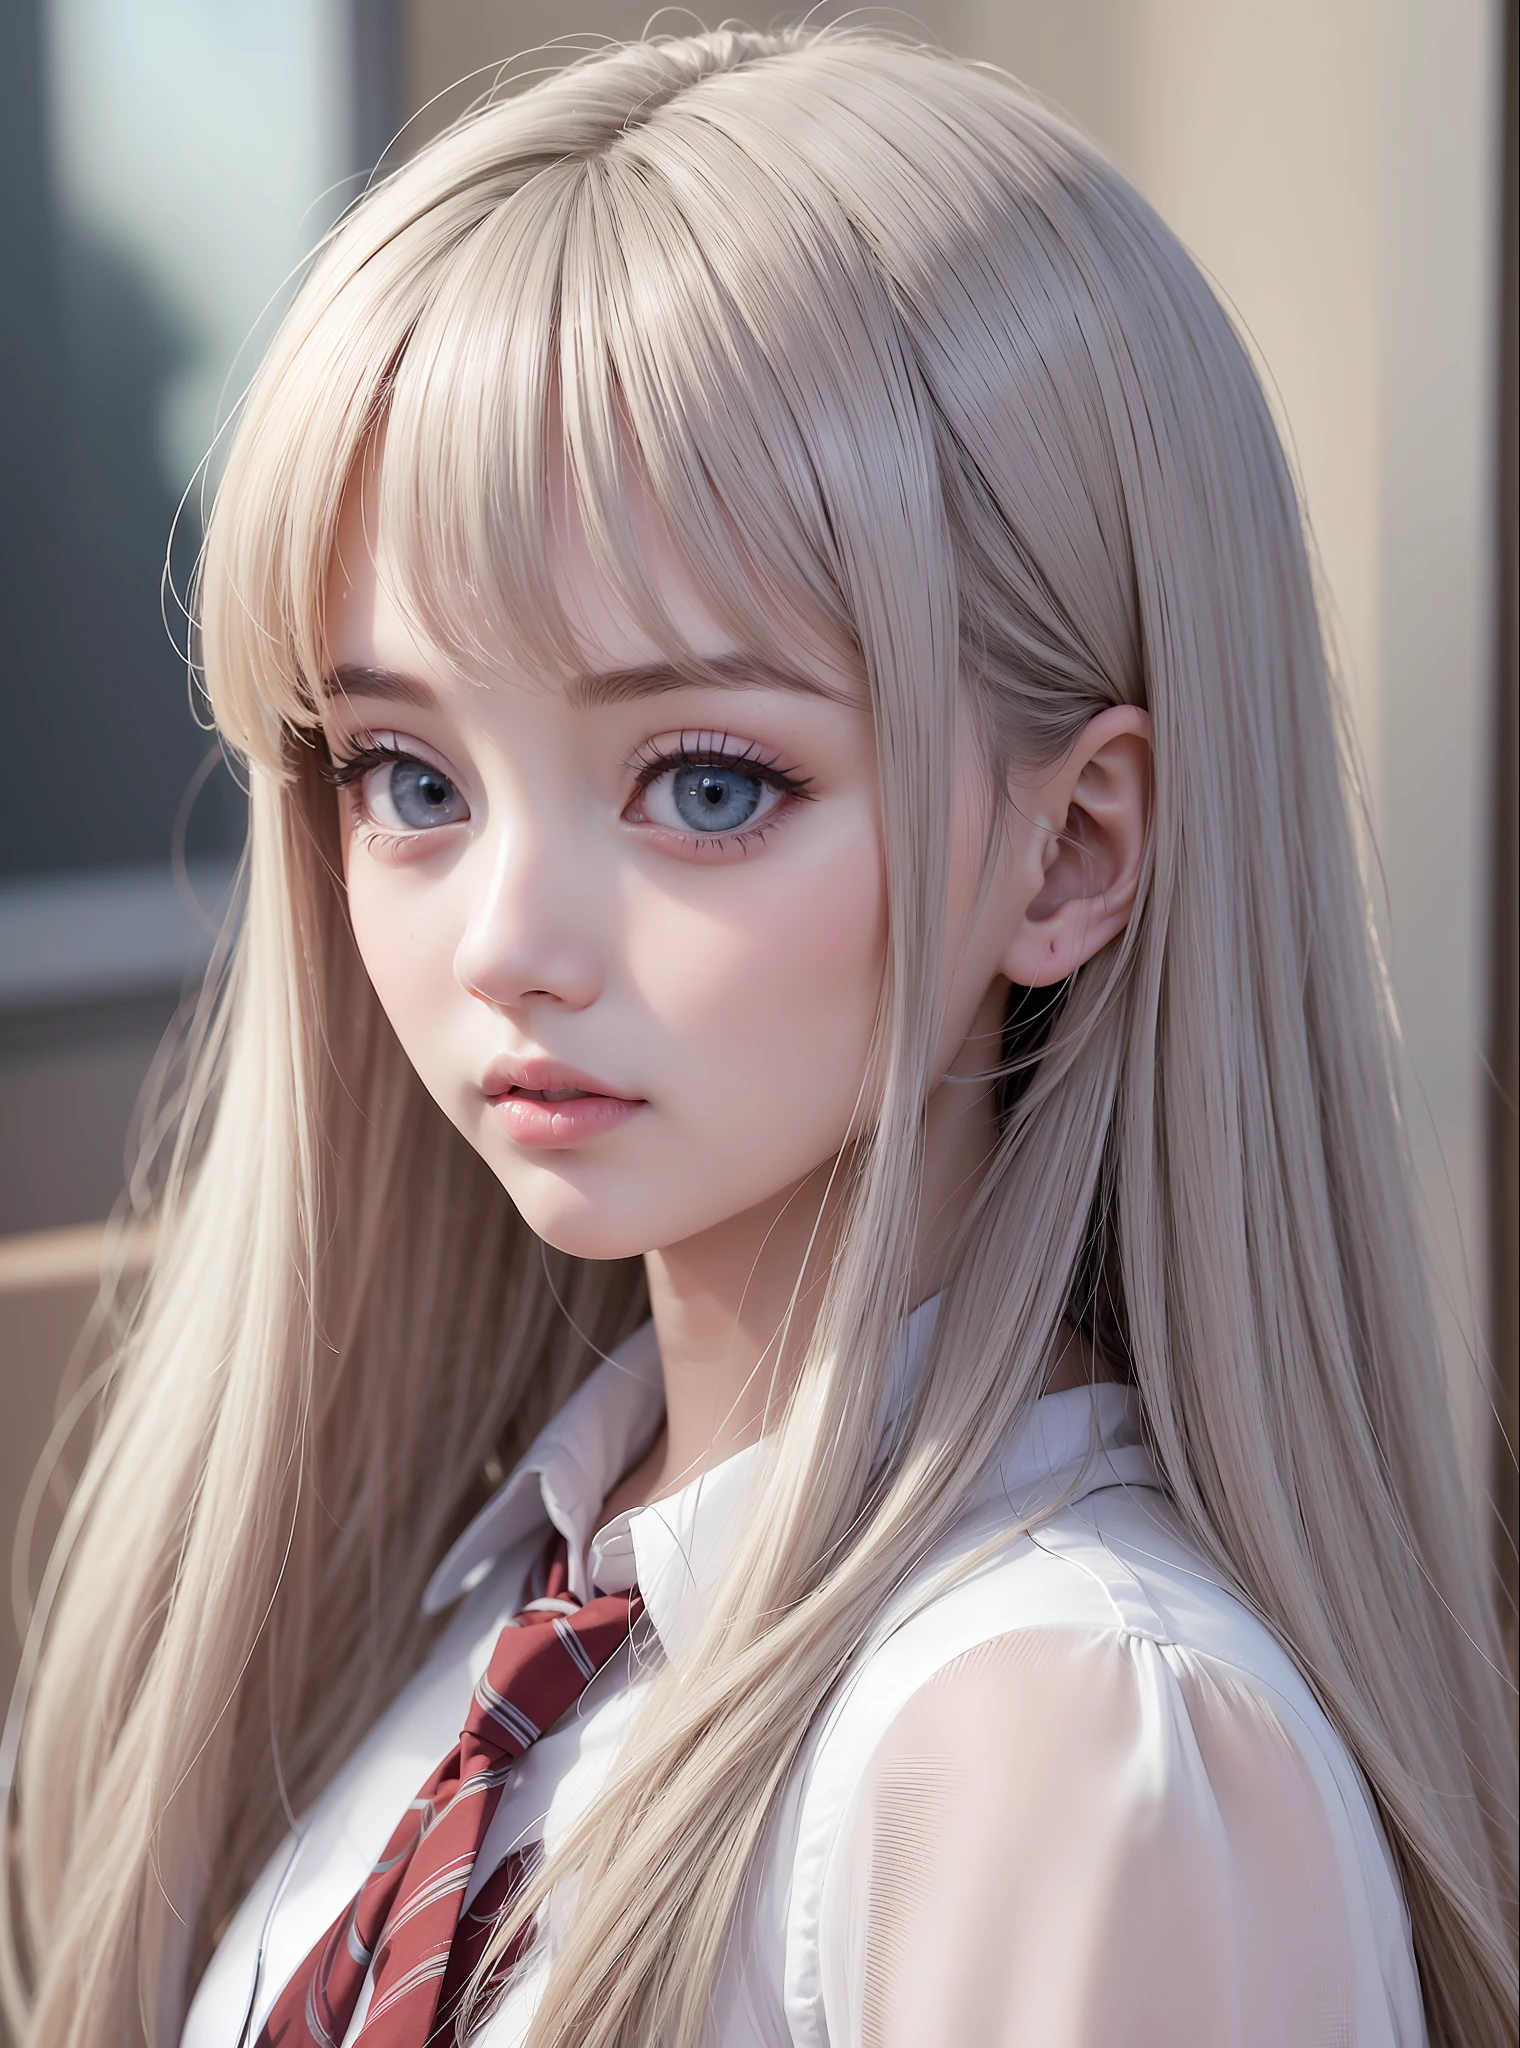 1 girl, Super long hair, Beautiful and cute 17 year old beautiful girl、Beautiful bangs、Ultimate Beauty、bright expression、Beautiful blue eyes, Bright and dazzling platinum blonde、Long straight hair、Eyebrows behind bangs、student clothes、School Uniforms、textured white skin, high details, Best Quality, 4K high resolution、glowy skin